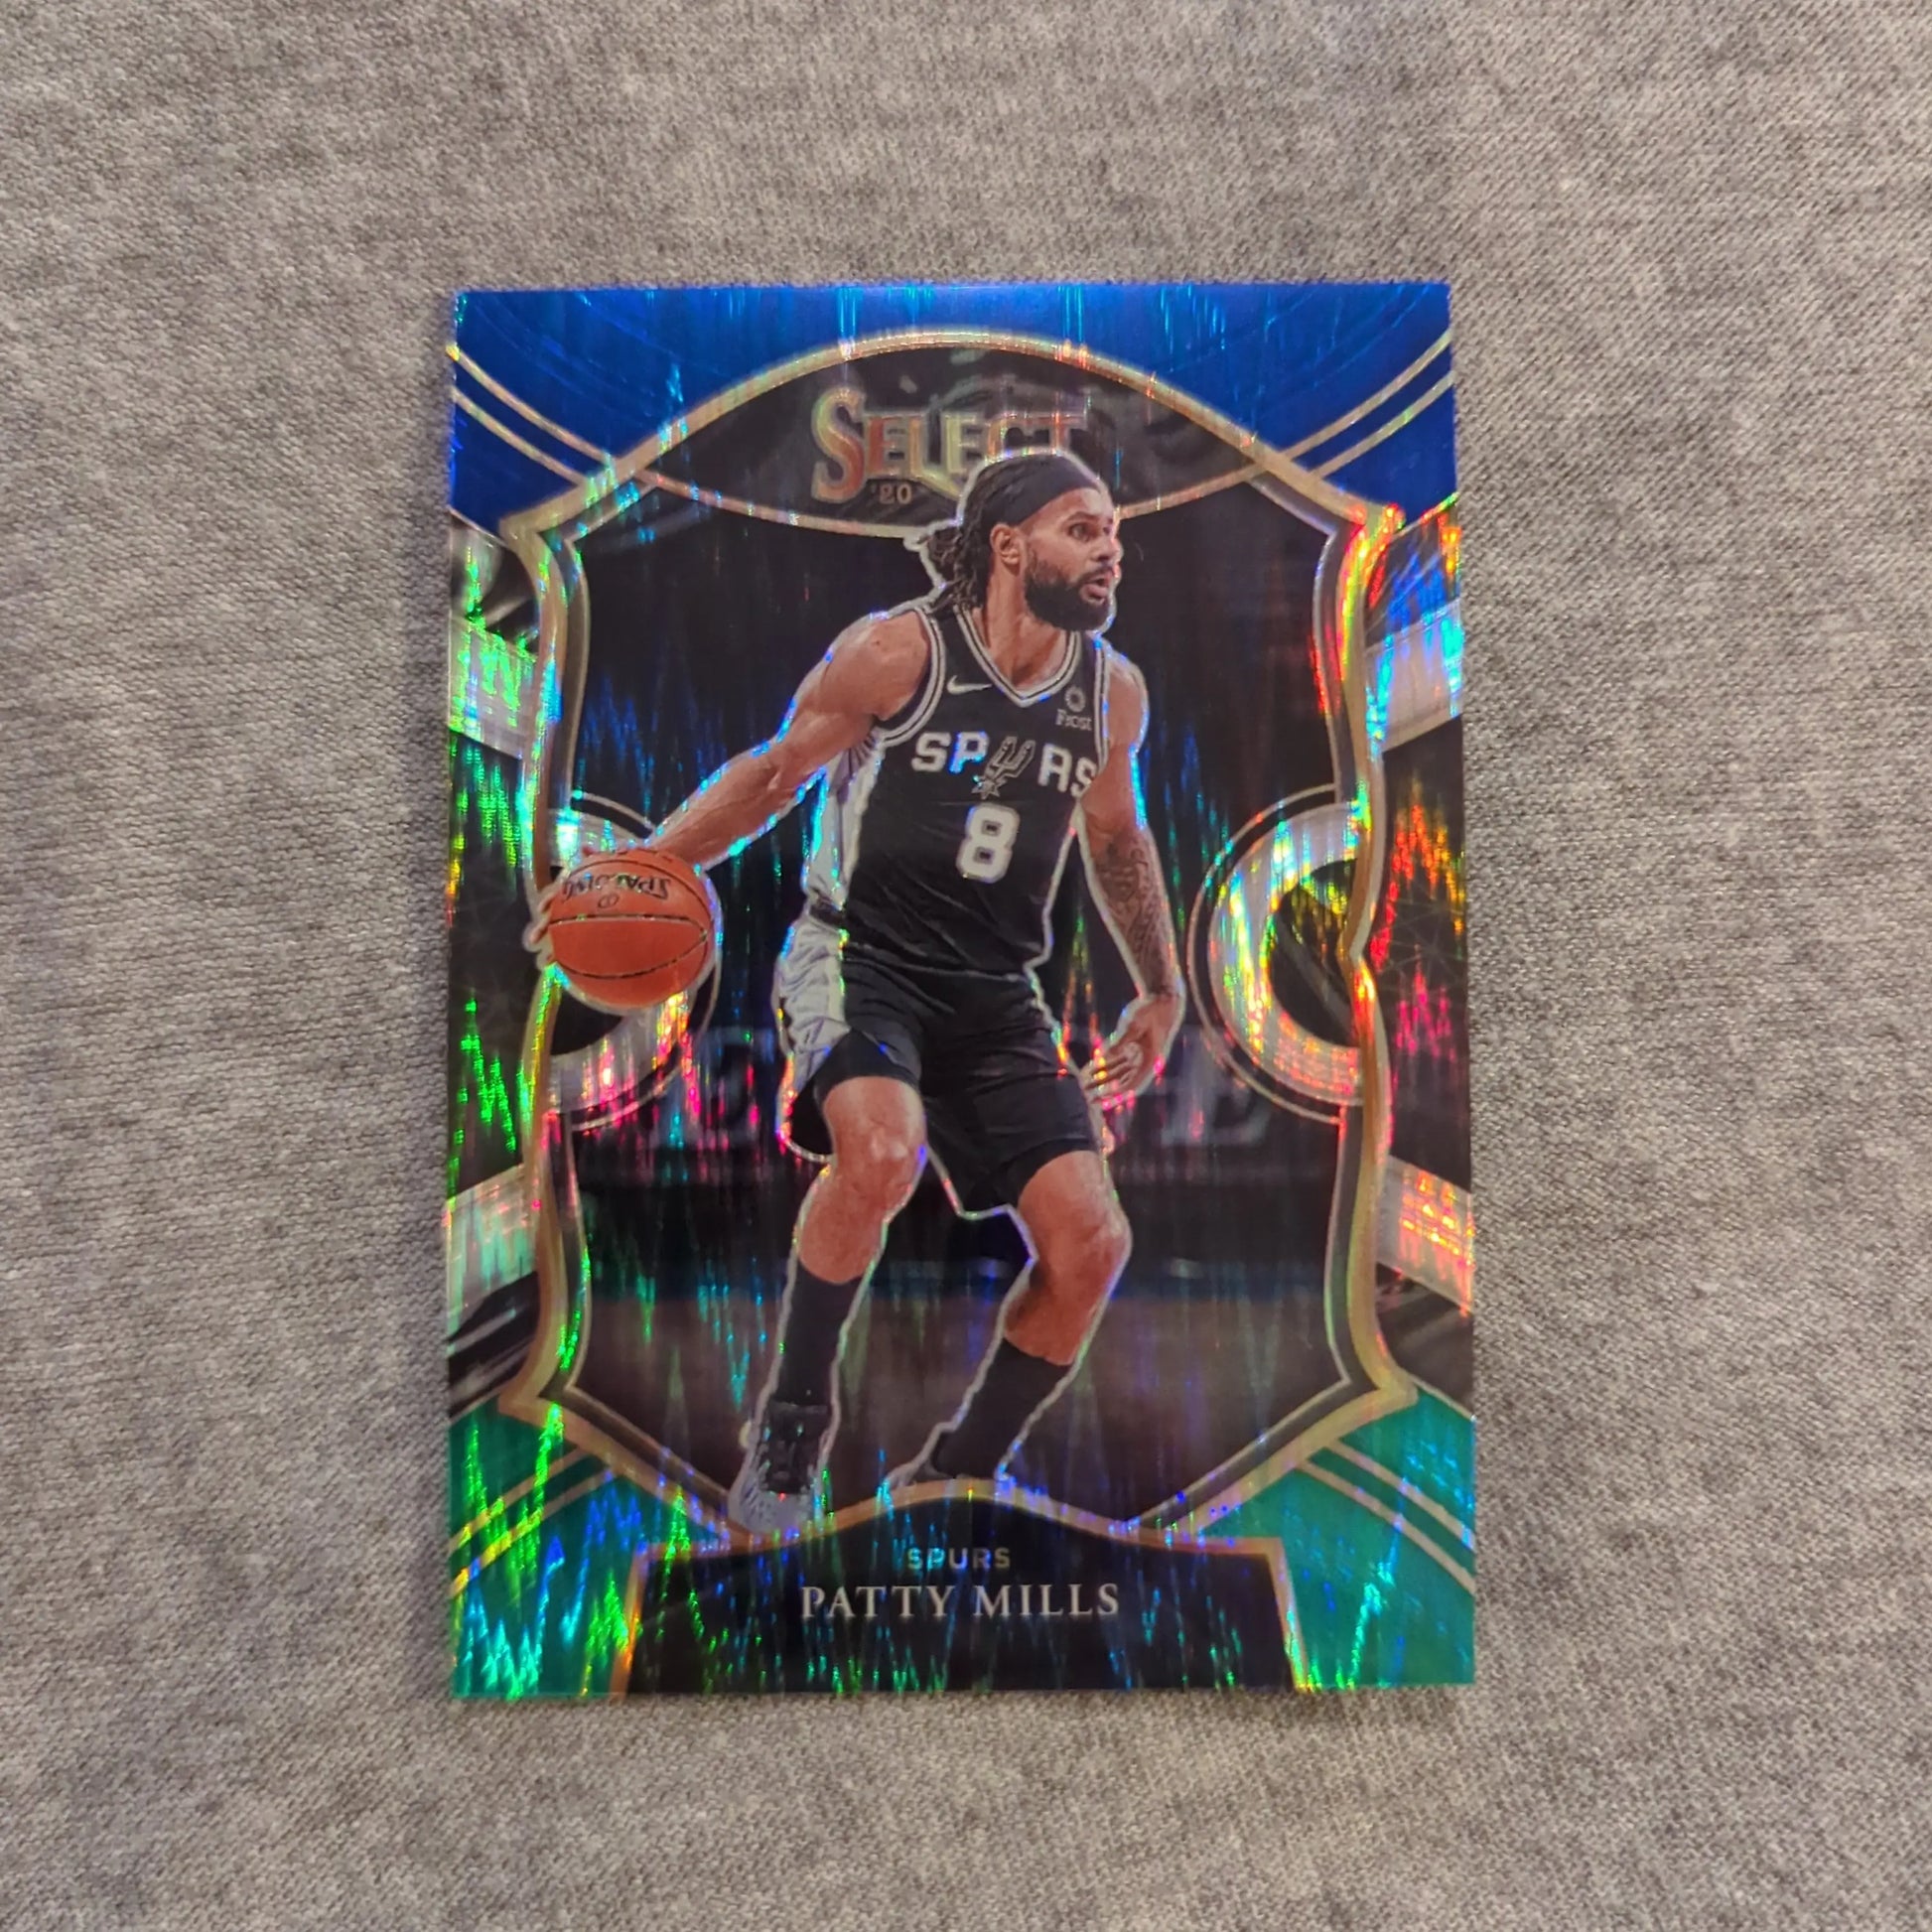 PANINI SELECT 2020-21 Patty Mills Blue Green Shimmer /49 FRENLY BRICKS - Open 7 Days